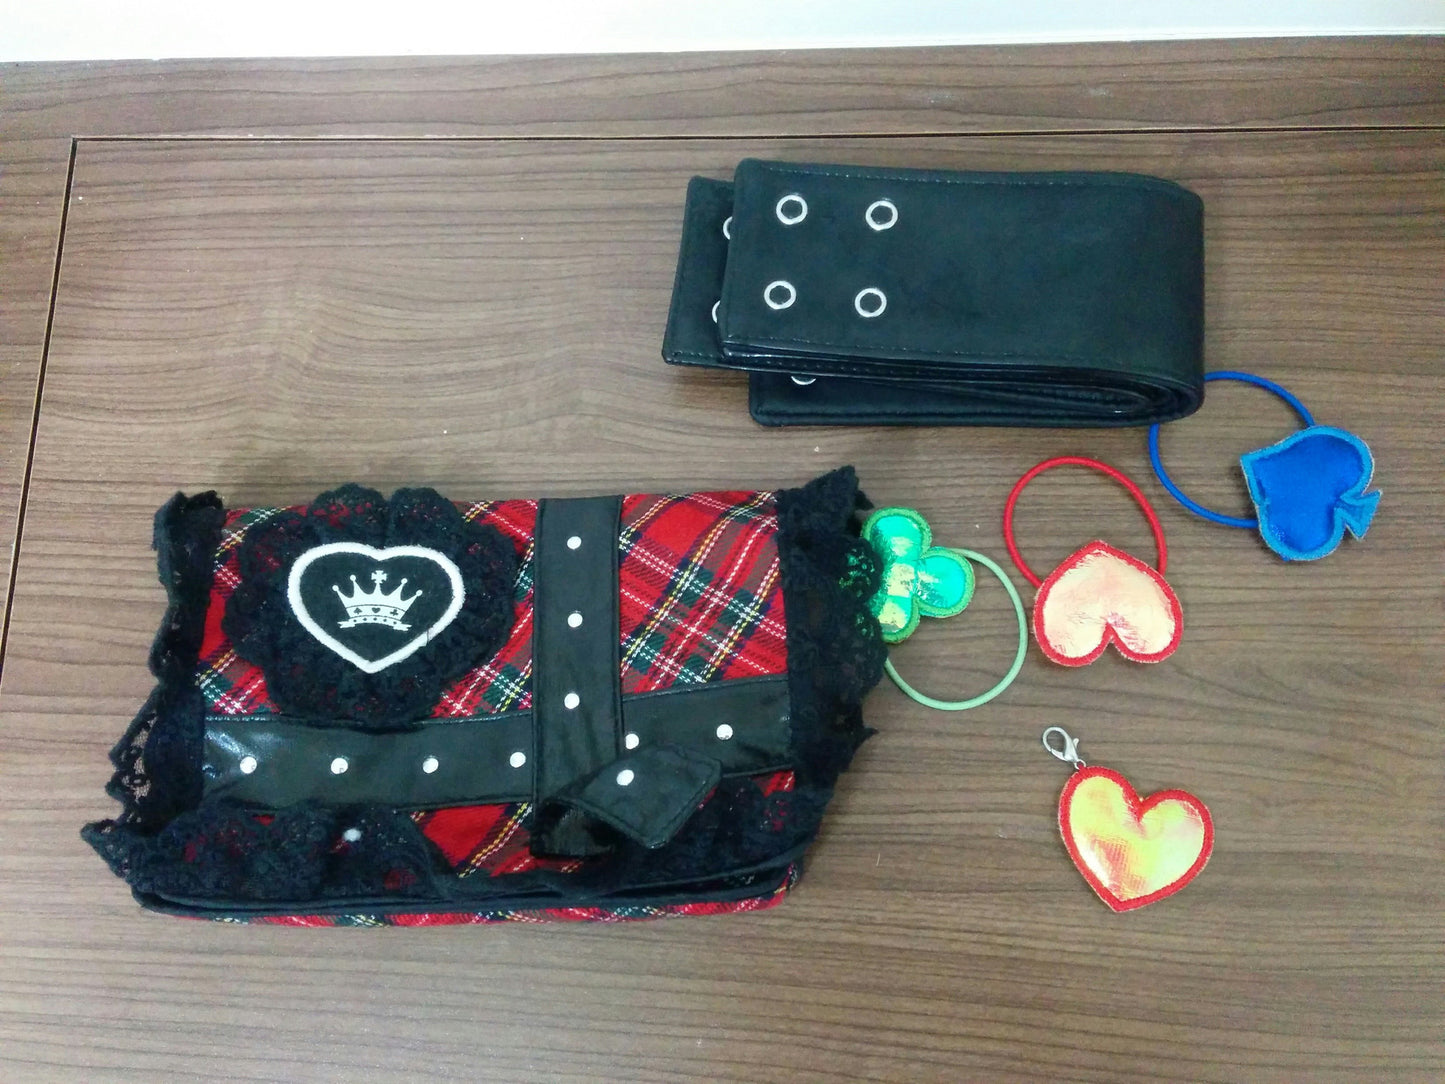 Takara Shugo Chara My Guardian Characters Amulet Accessories Pouch Bag Cosplay Set Used Lost - Lavits Figure
 - 1